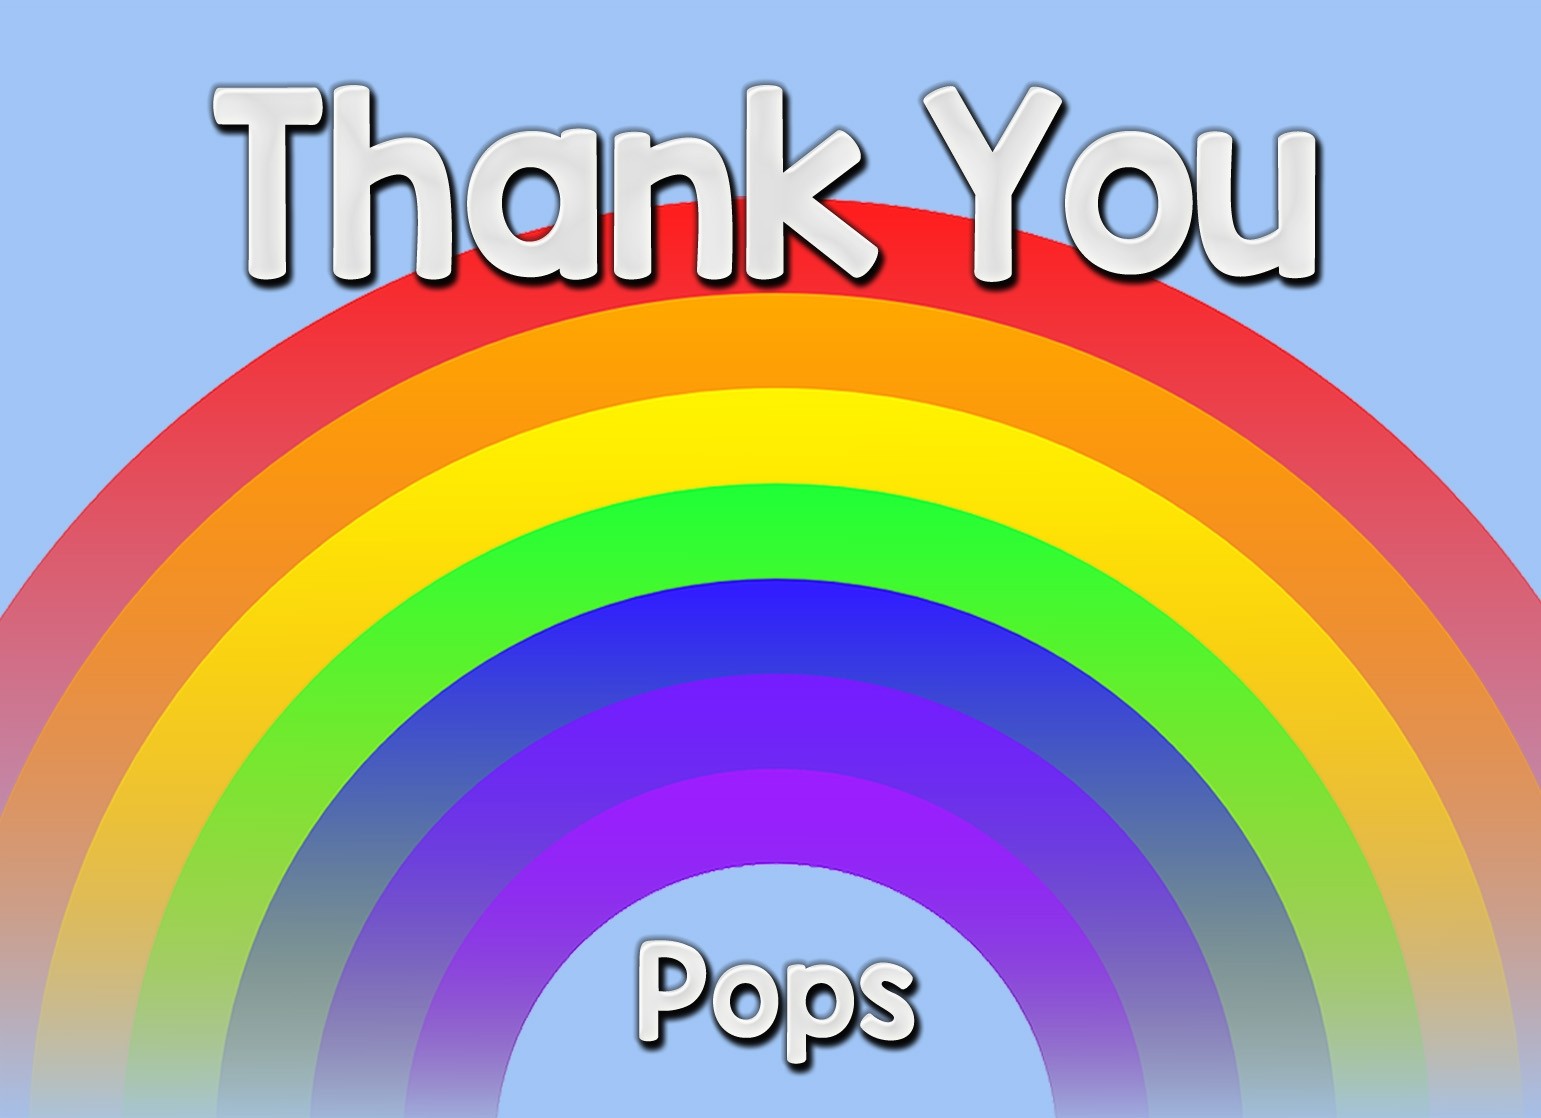 Thank You 'Pops' Rainbow Greeting Card